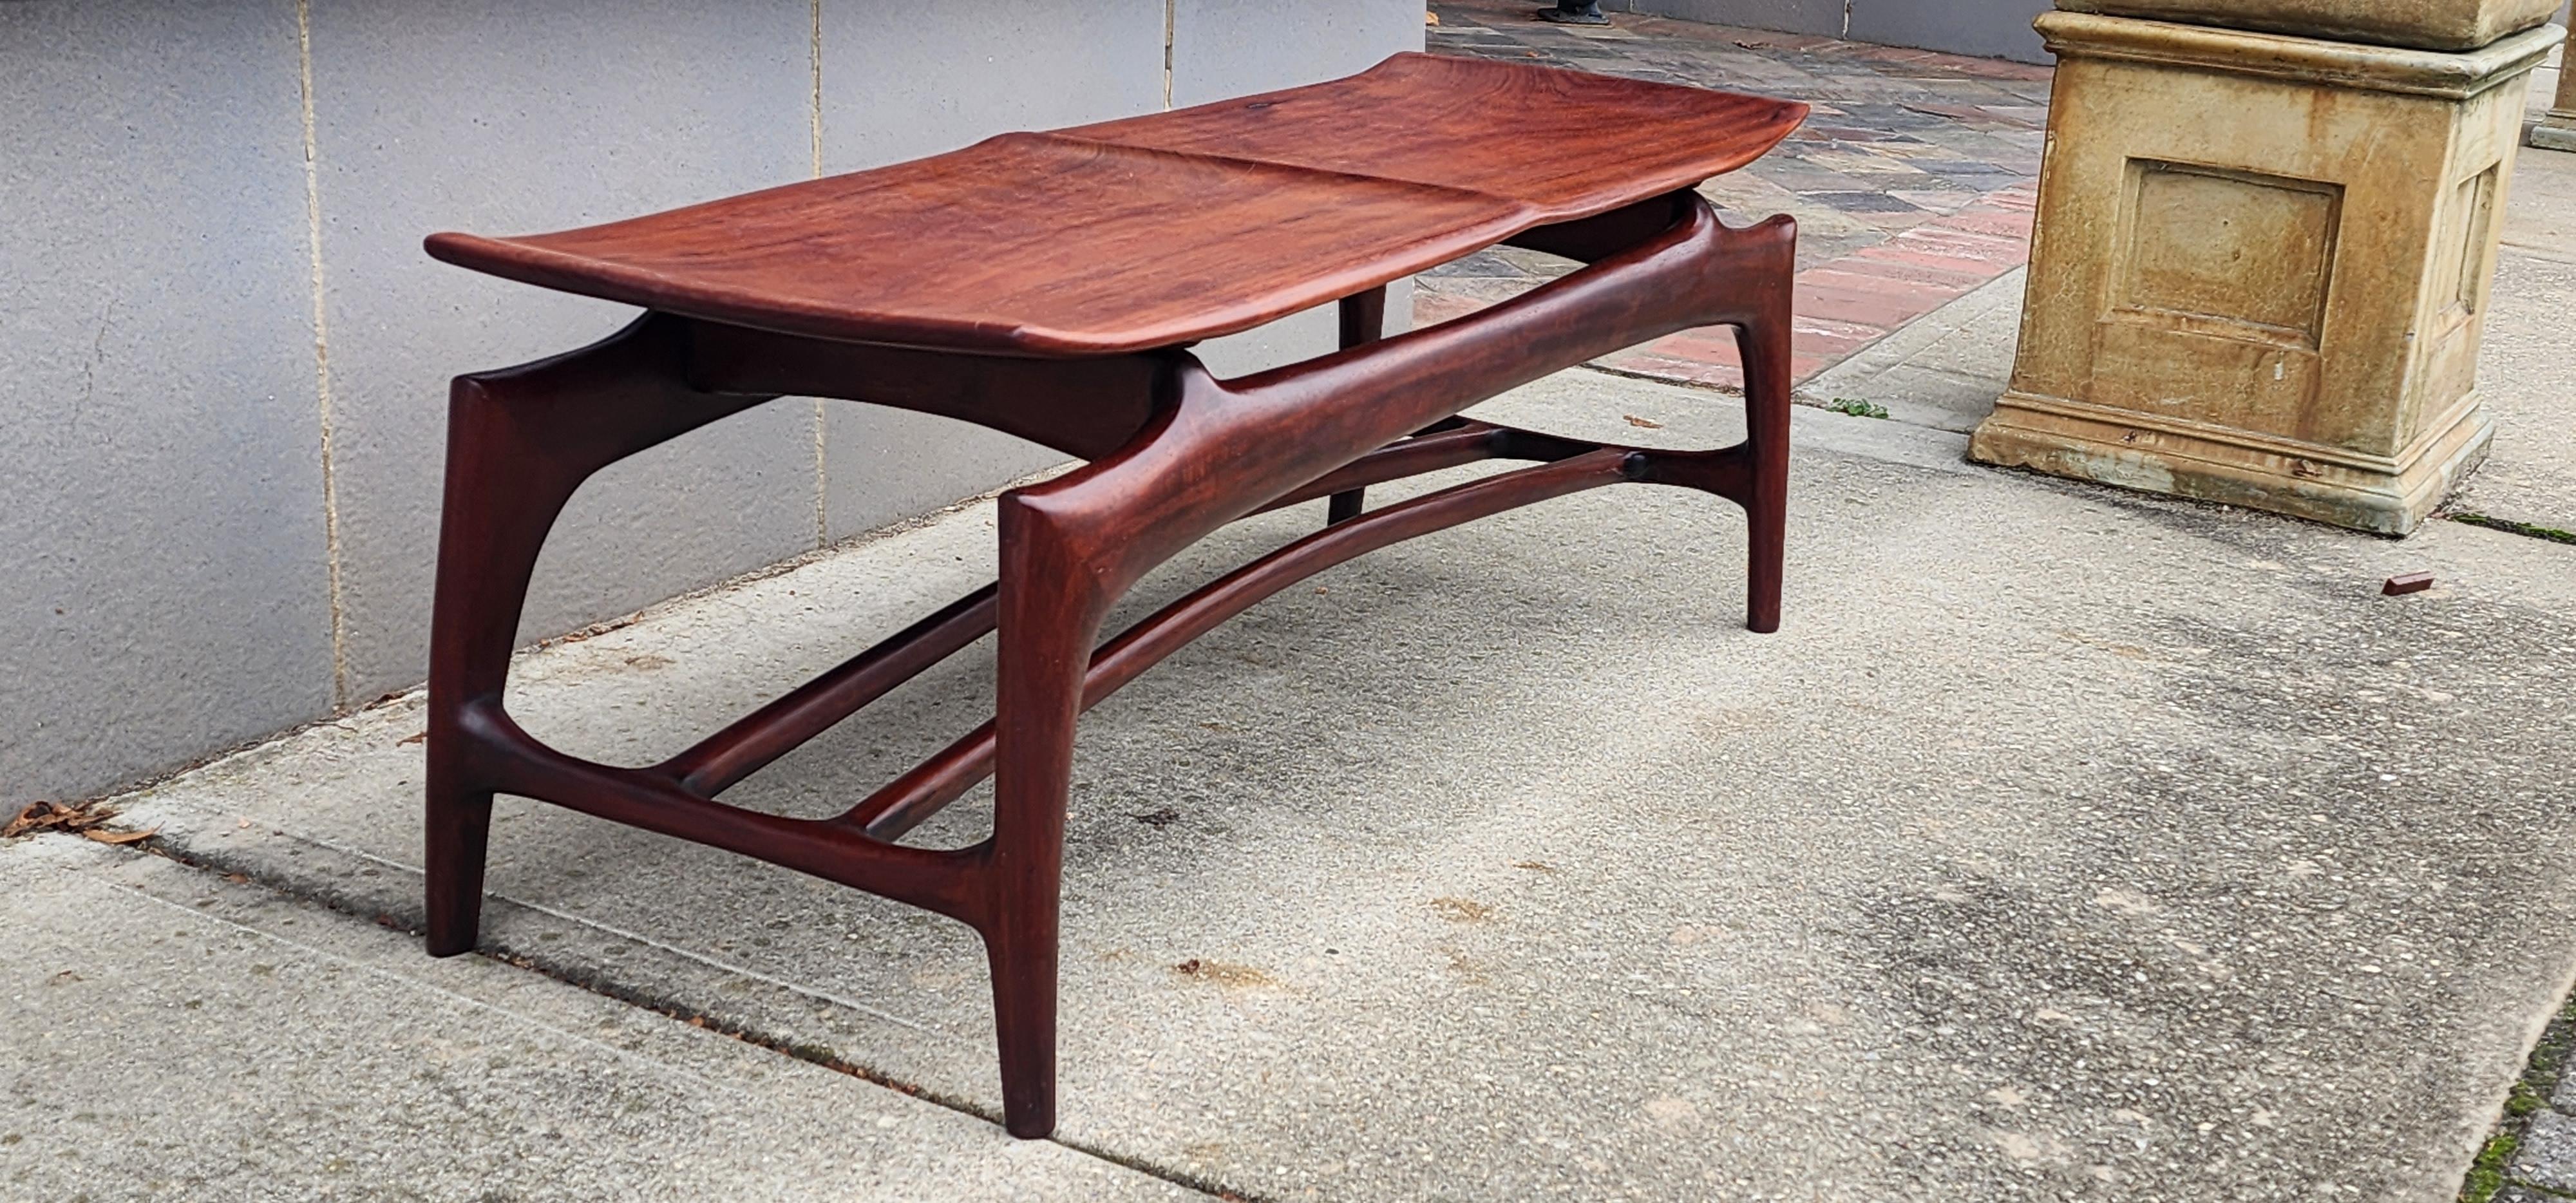 20th Century Vintage Rosewood Sculptural Studio Made Coffee Table or Bench For Sale